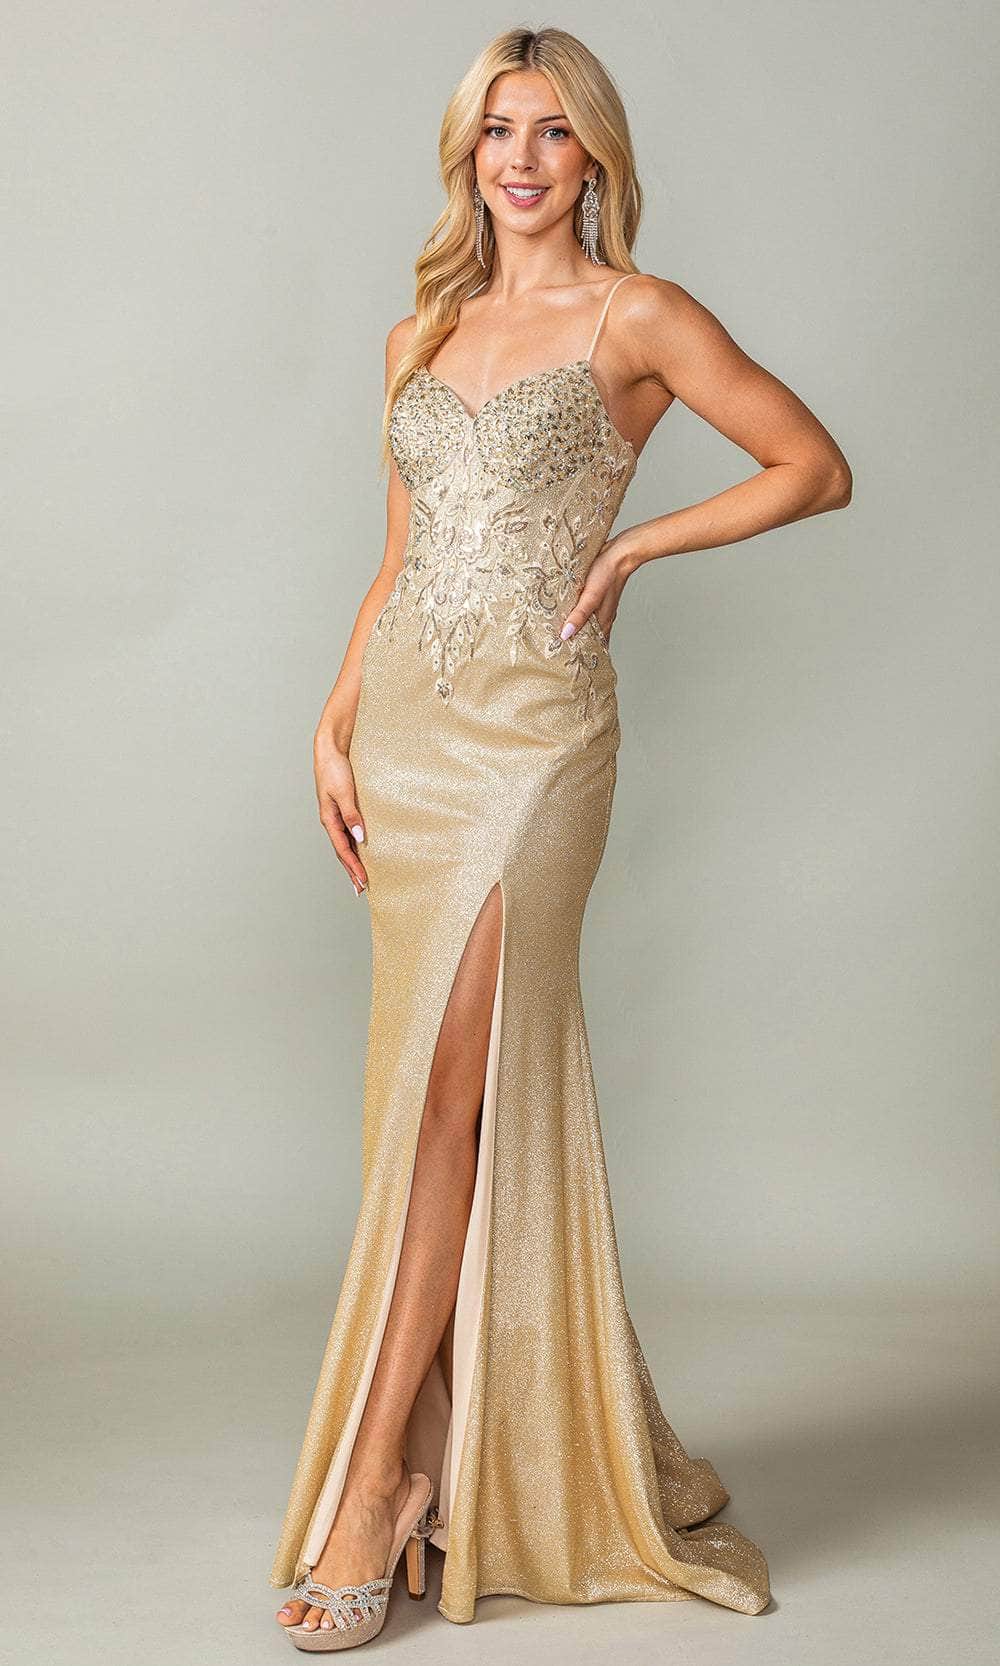 Dancing Queen 4375 - Embroidered High Slit Prom Dress
